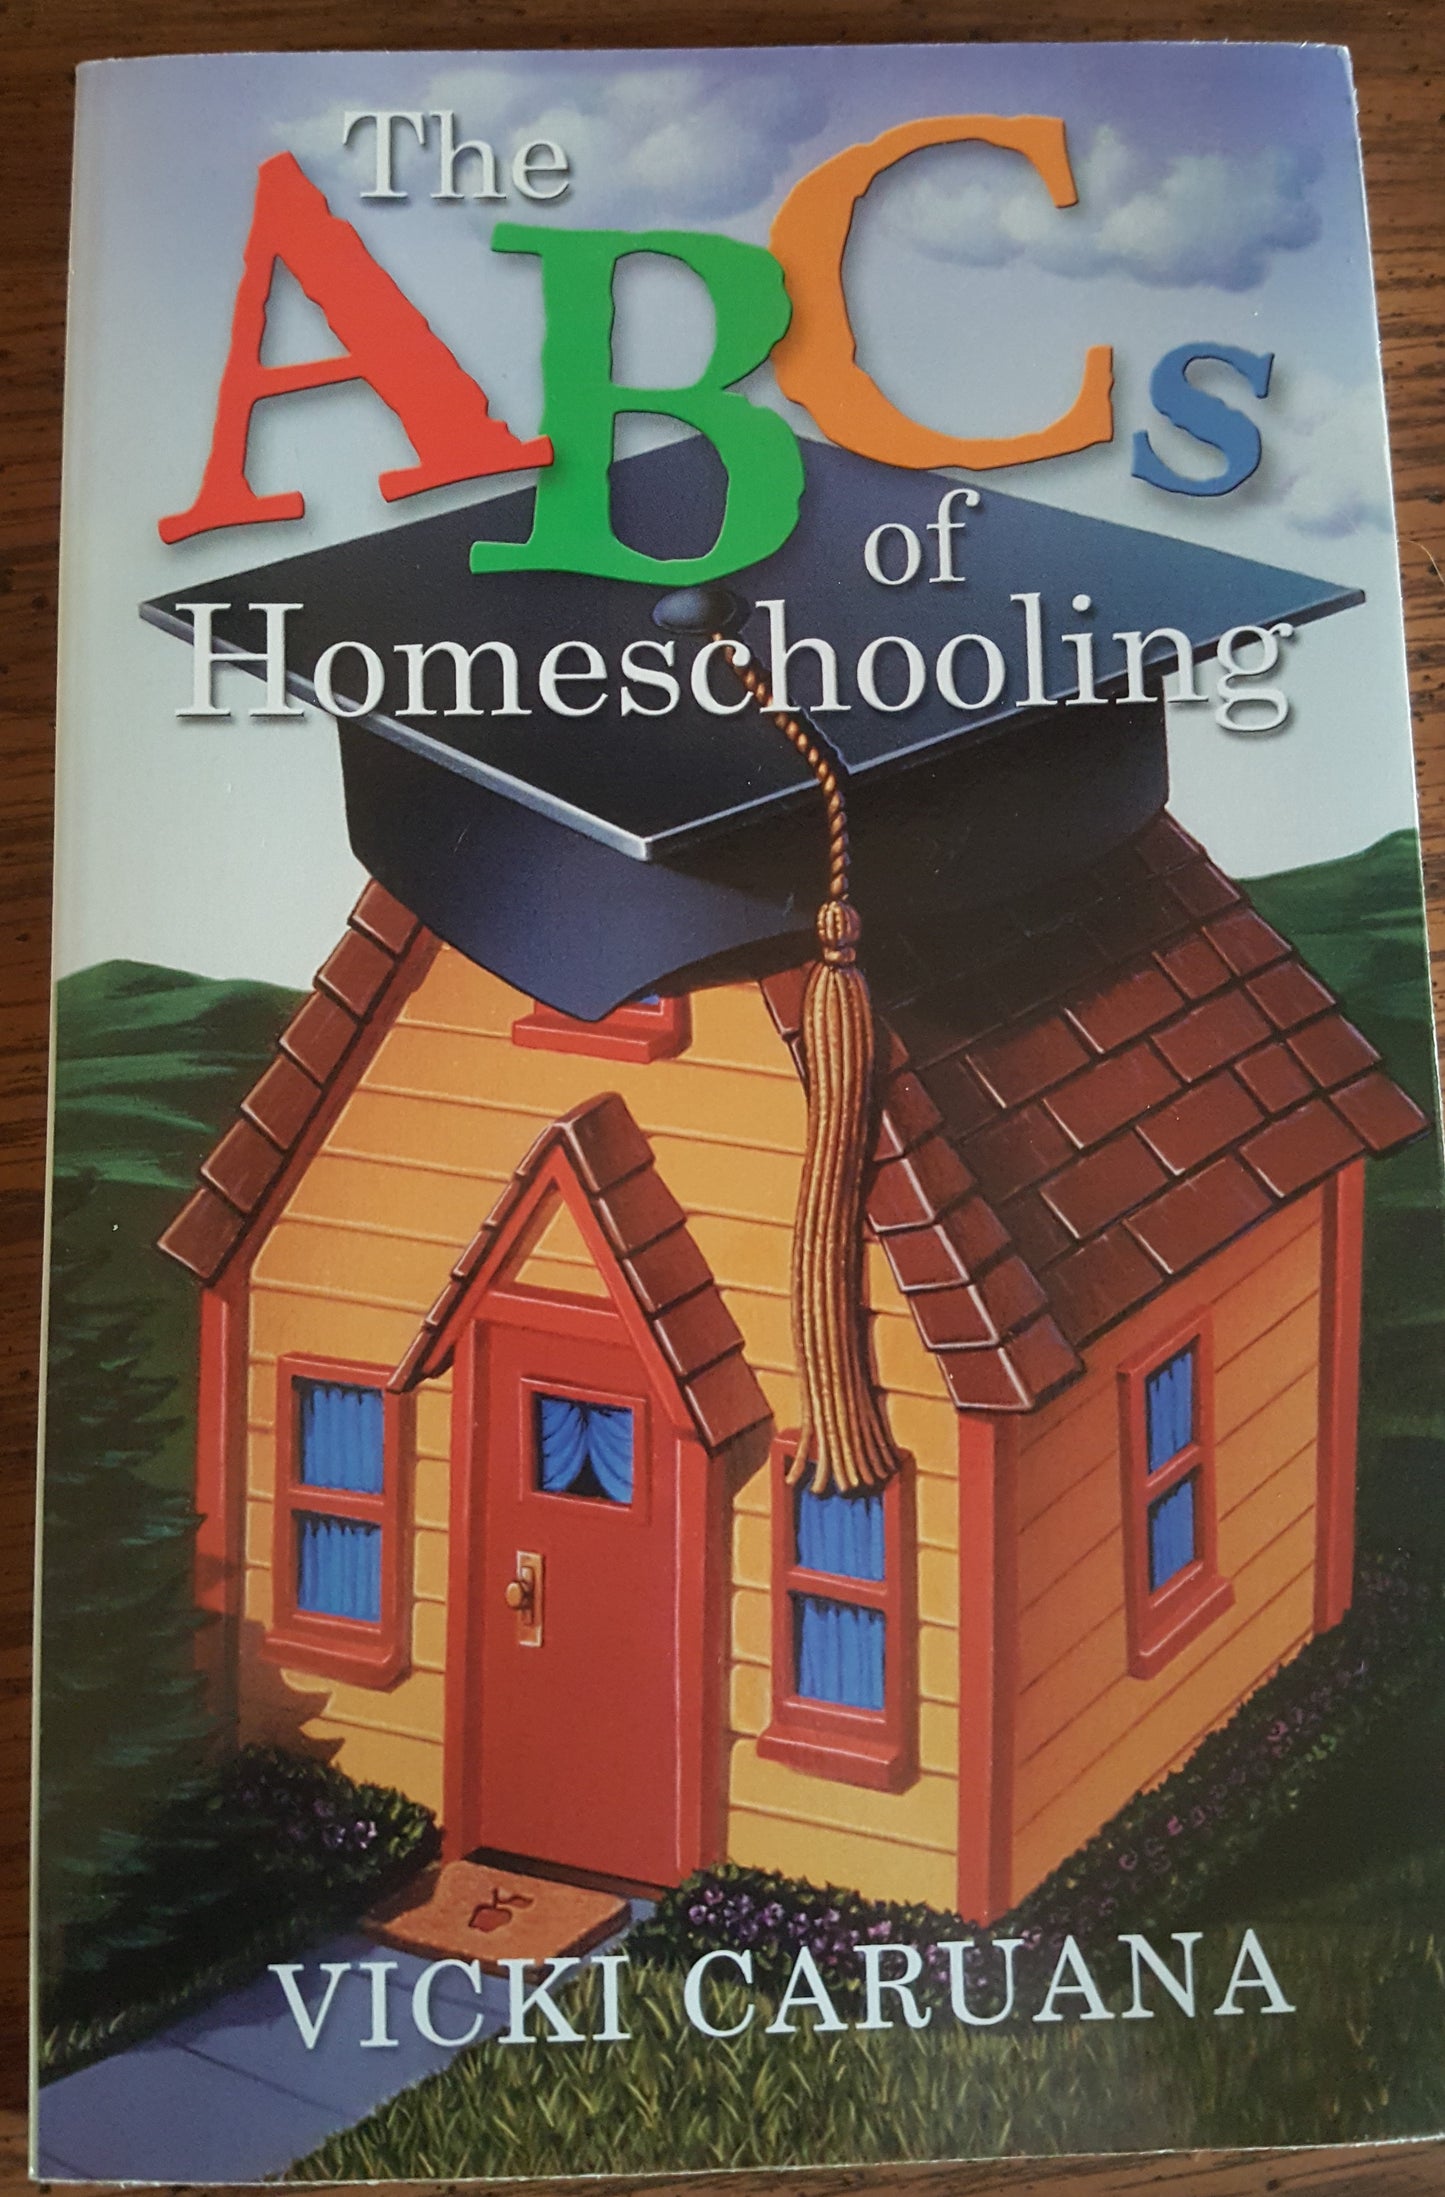 The ABCs of Homeschooling